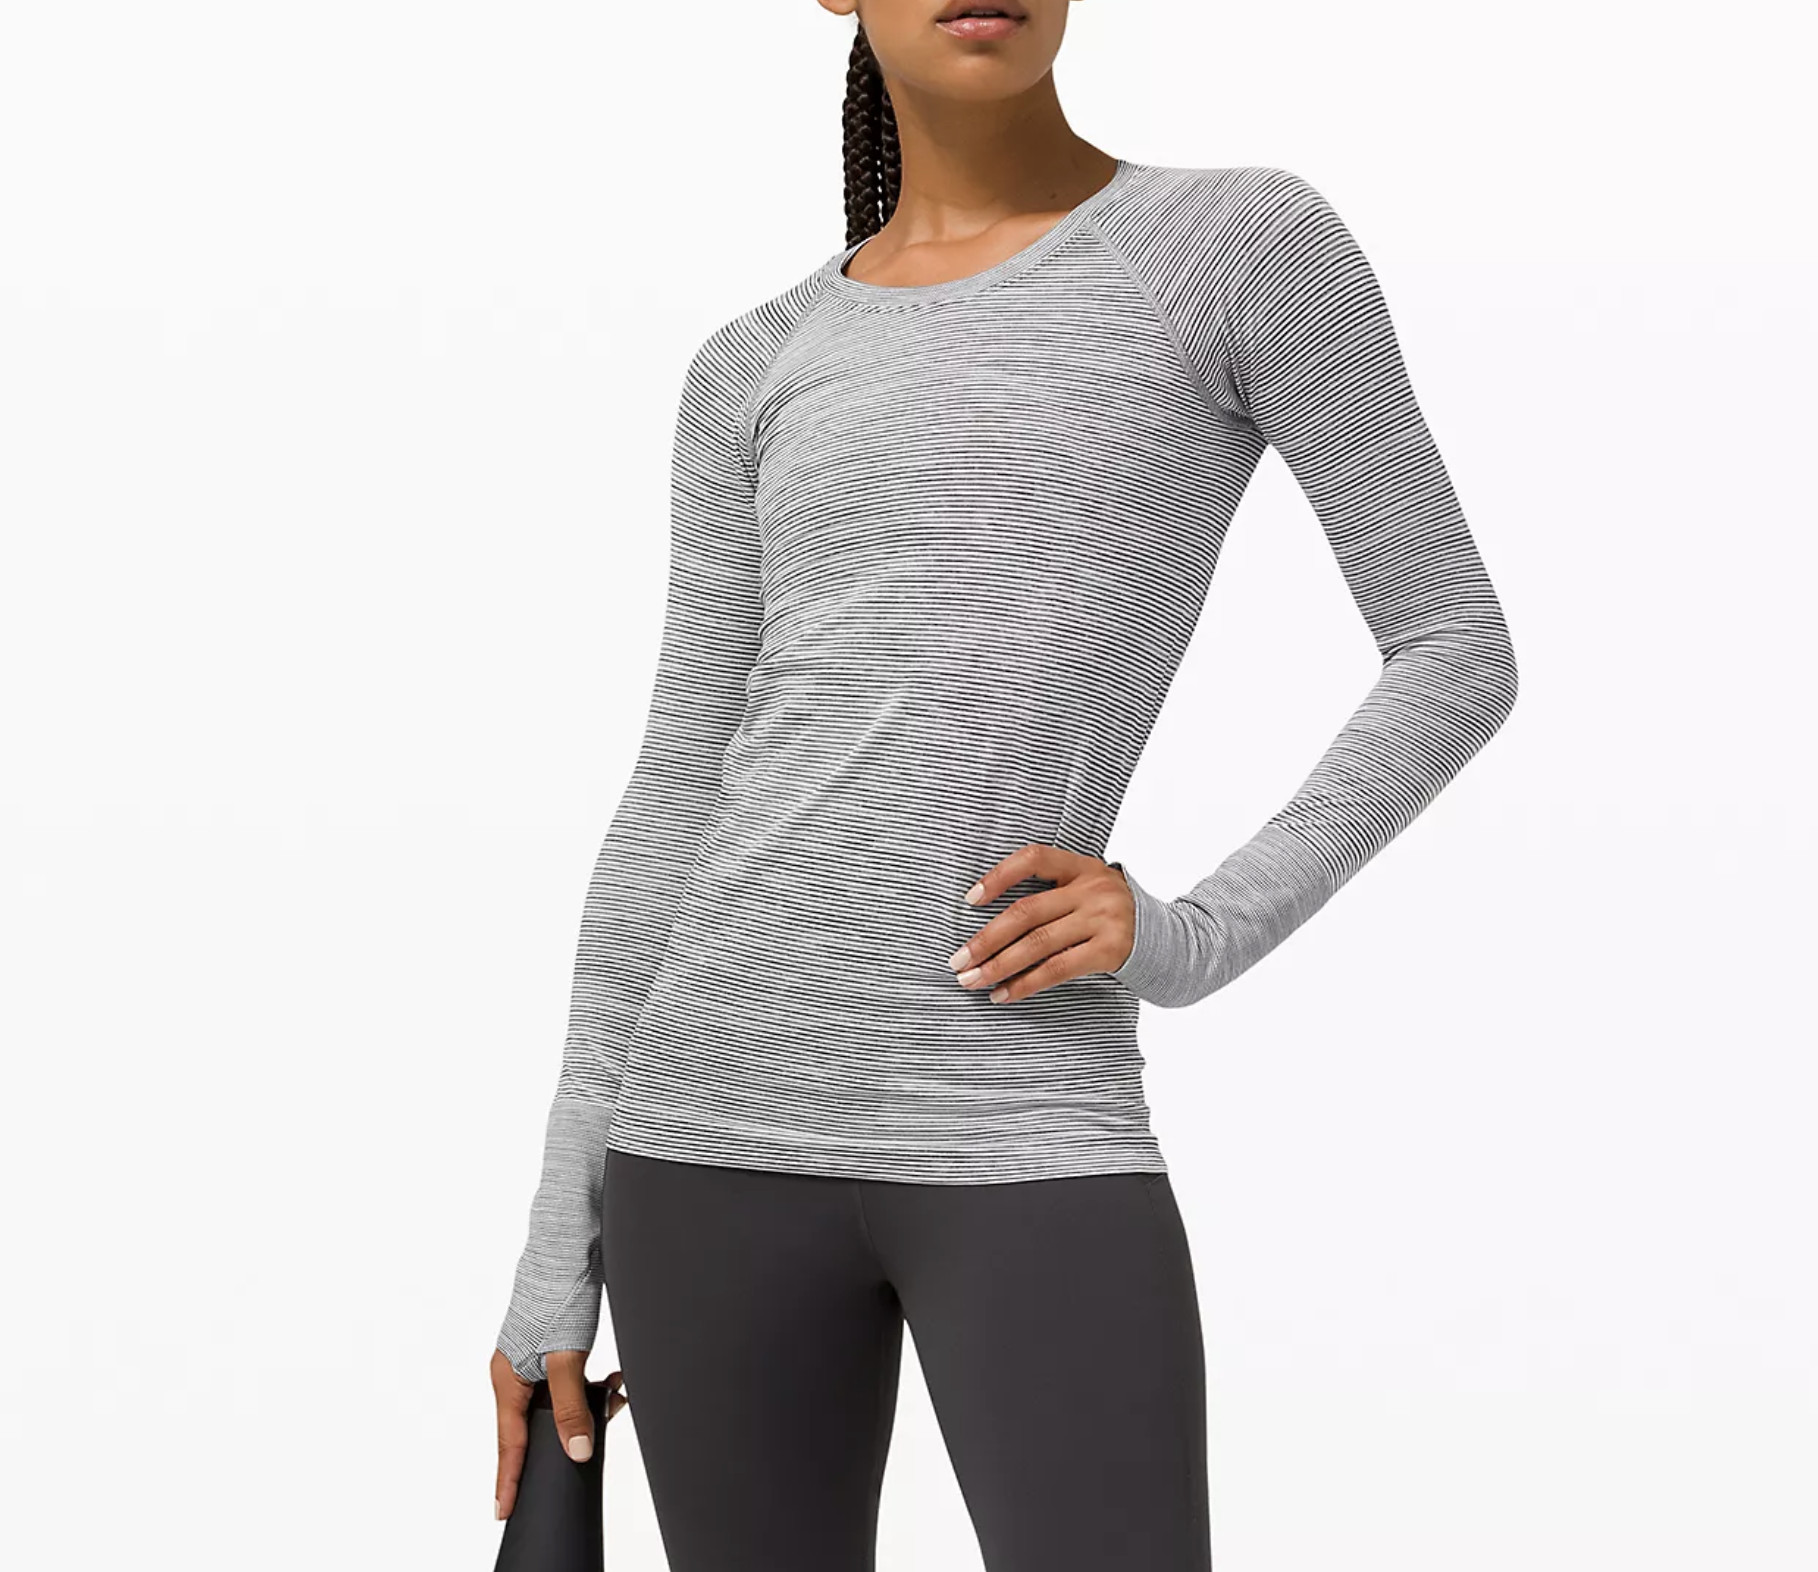 The Best Women's Long-Sleeve Workout Shirts for 2022- Workout 